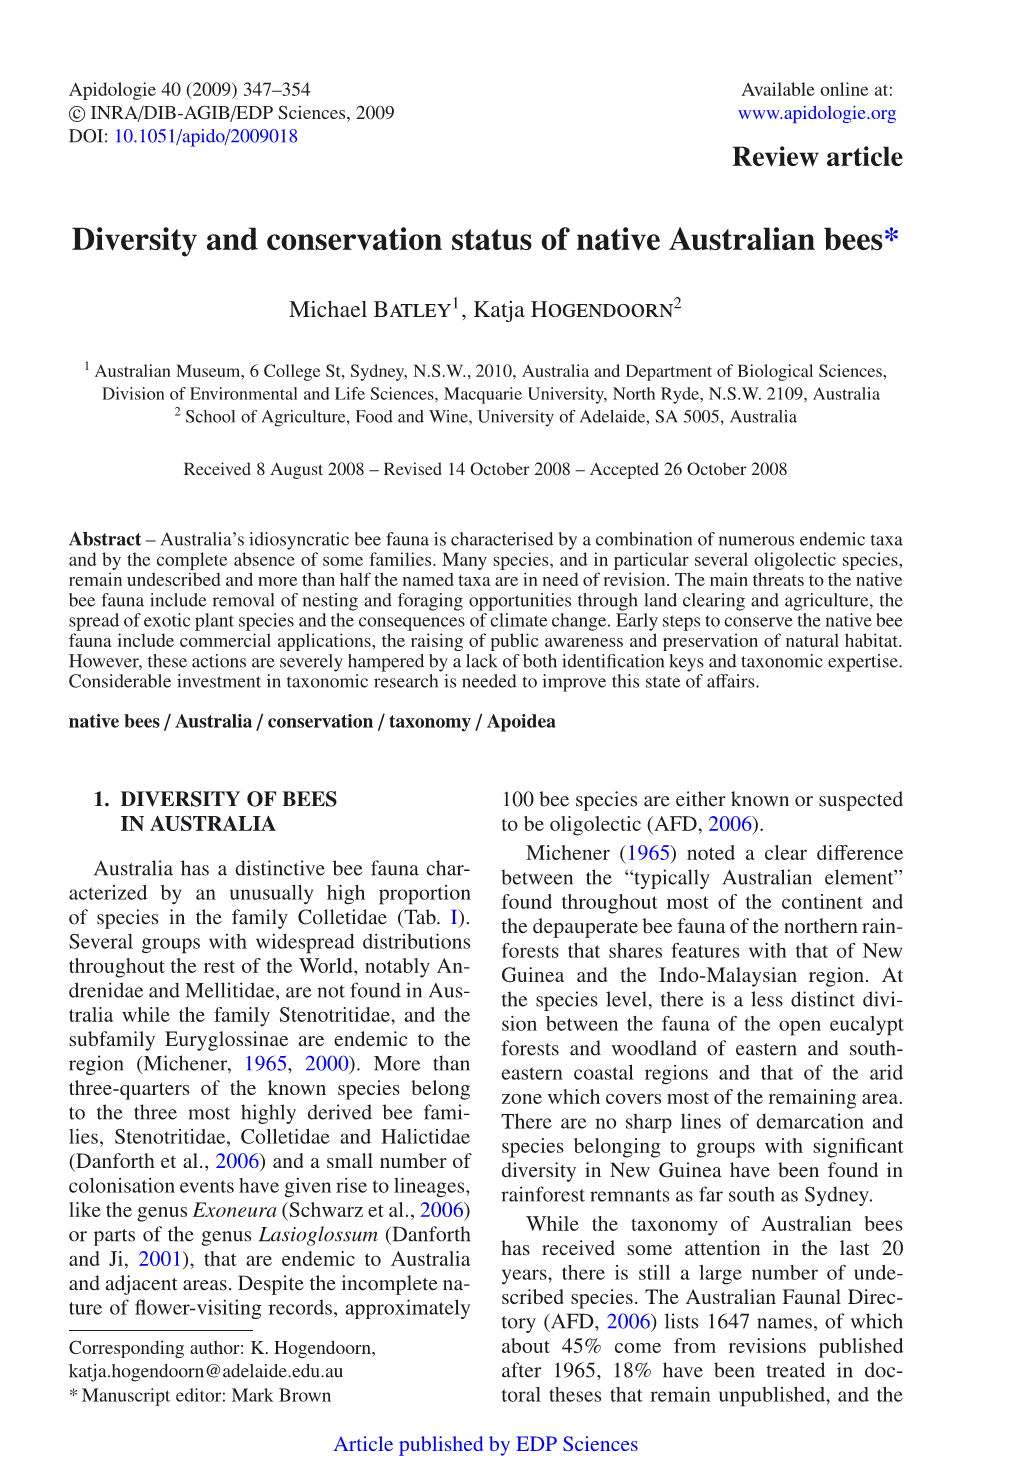 Diversity and Conservation Status of Native Australian Bees*